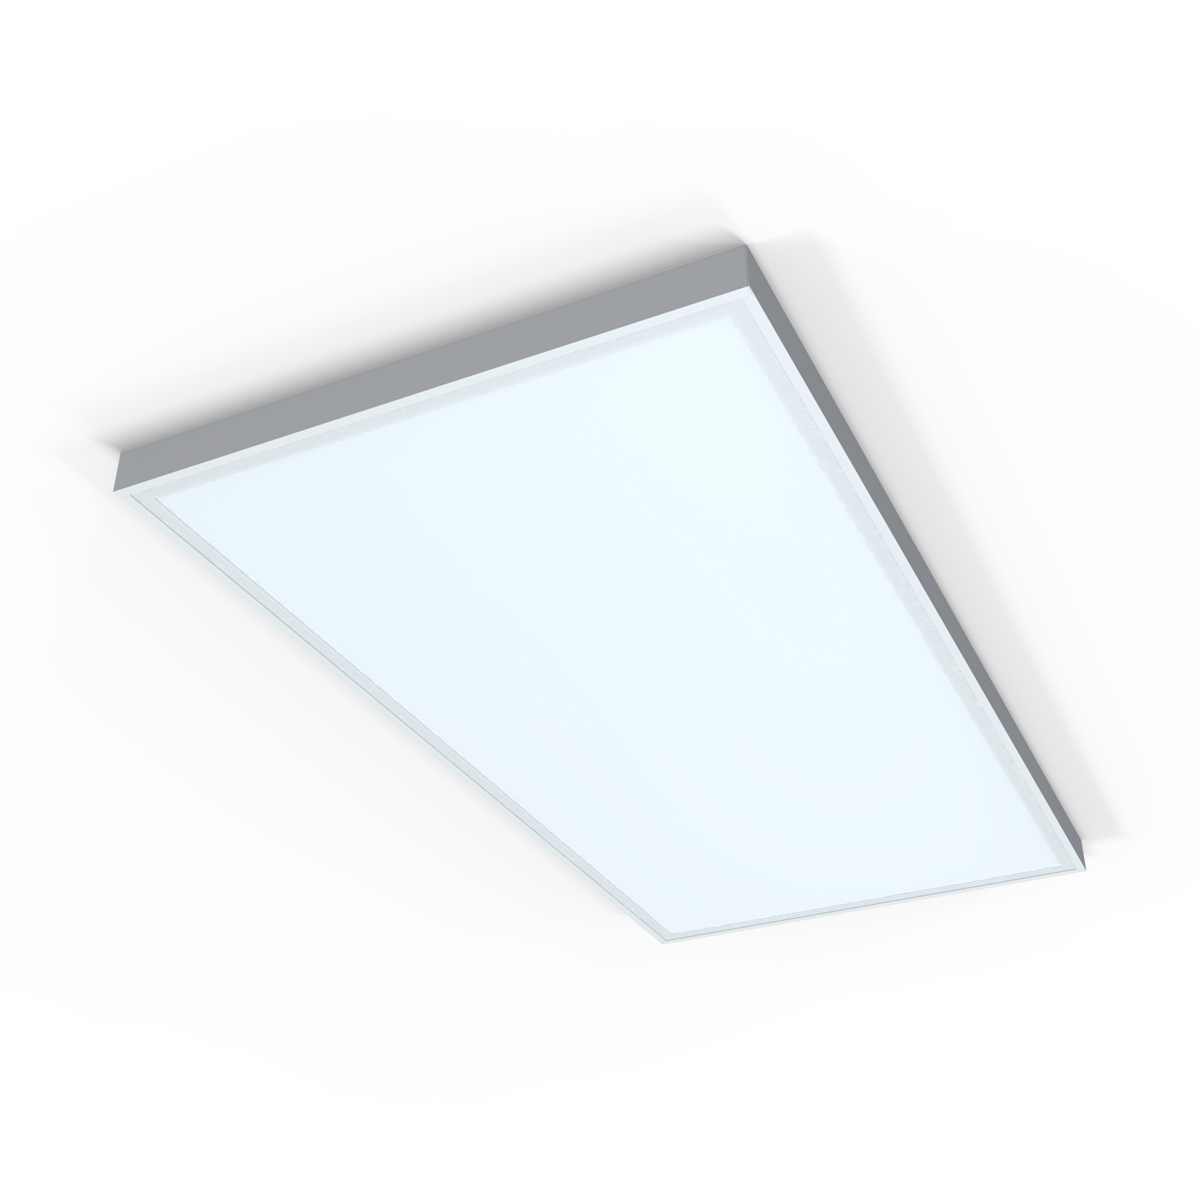 View 1200 x 600mm Surface Mounted LED Panel Light 4000K information